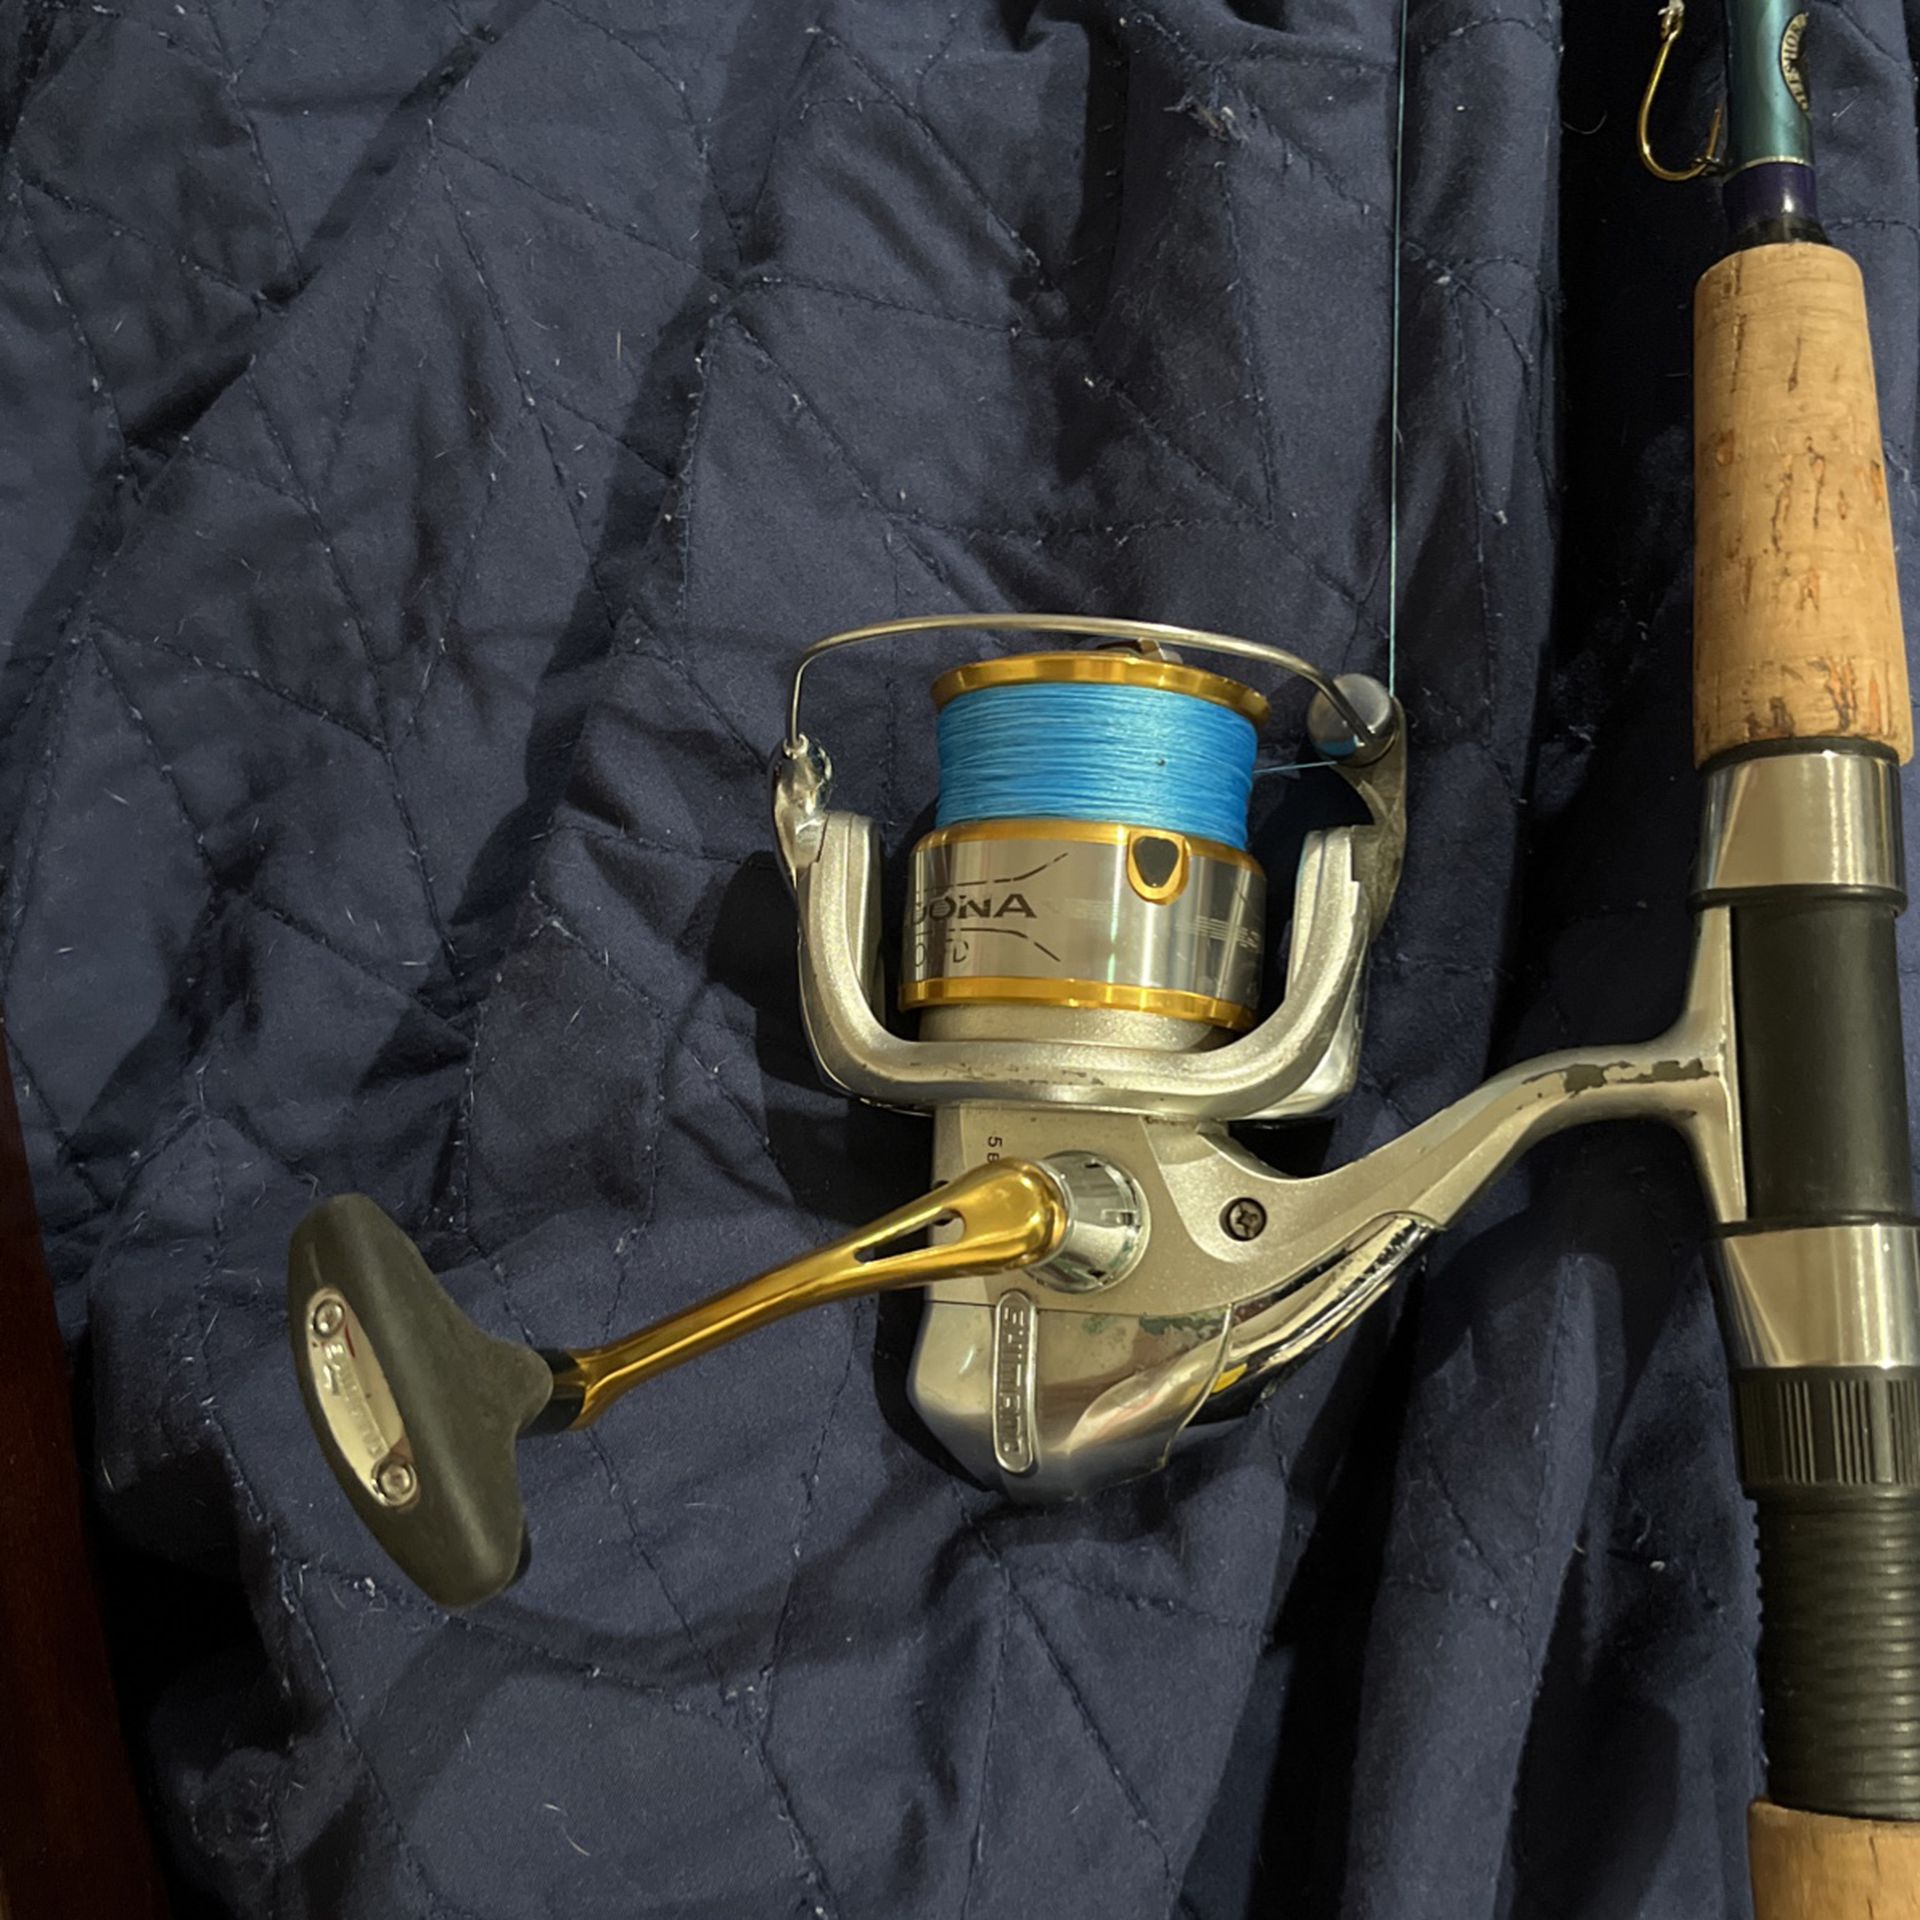 Offshore Angler Combo for Sale in Fort Lauderdale, FL - OfferUp